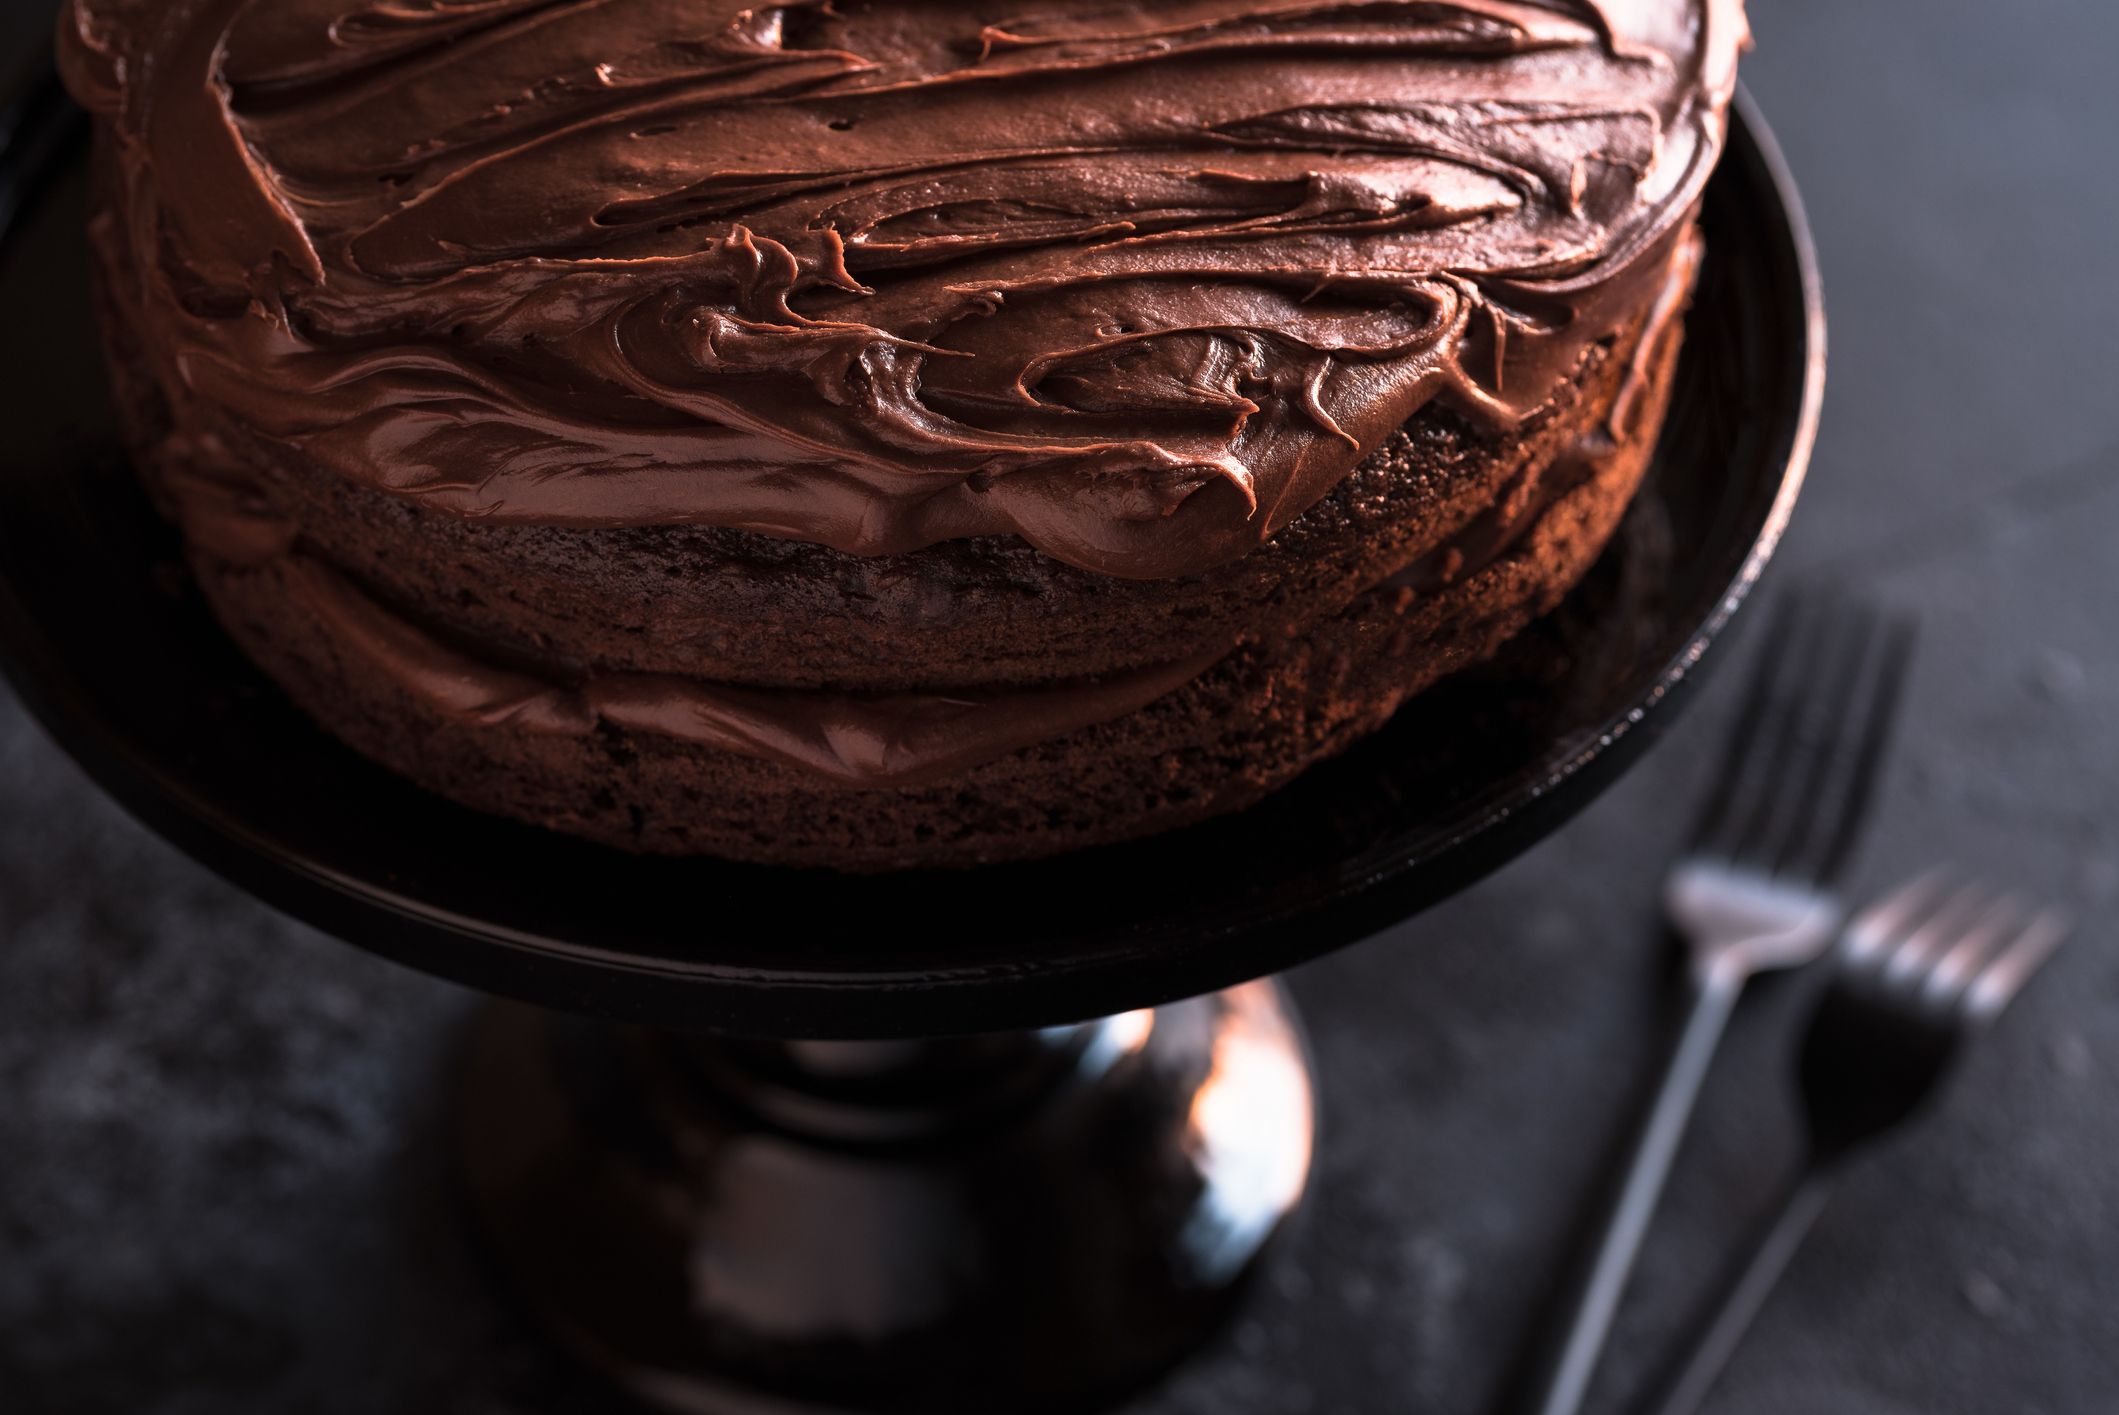 How to make an easy and delicious chocolate cake